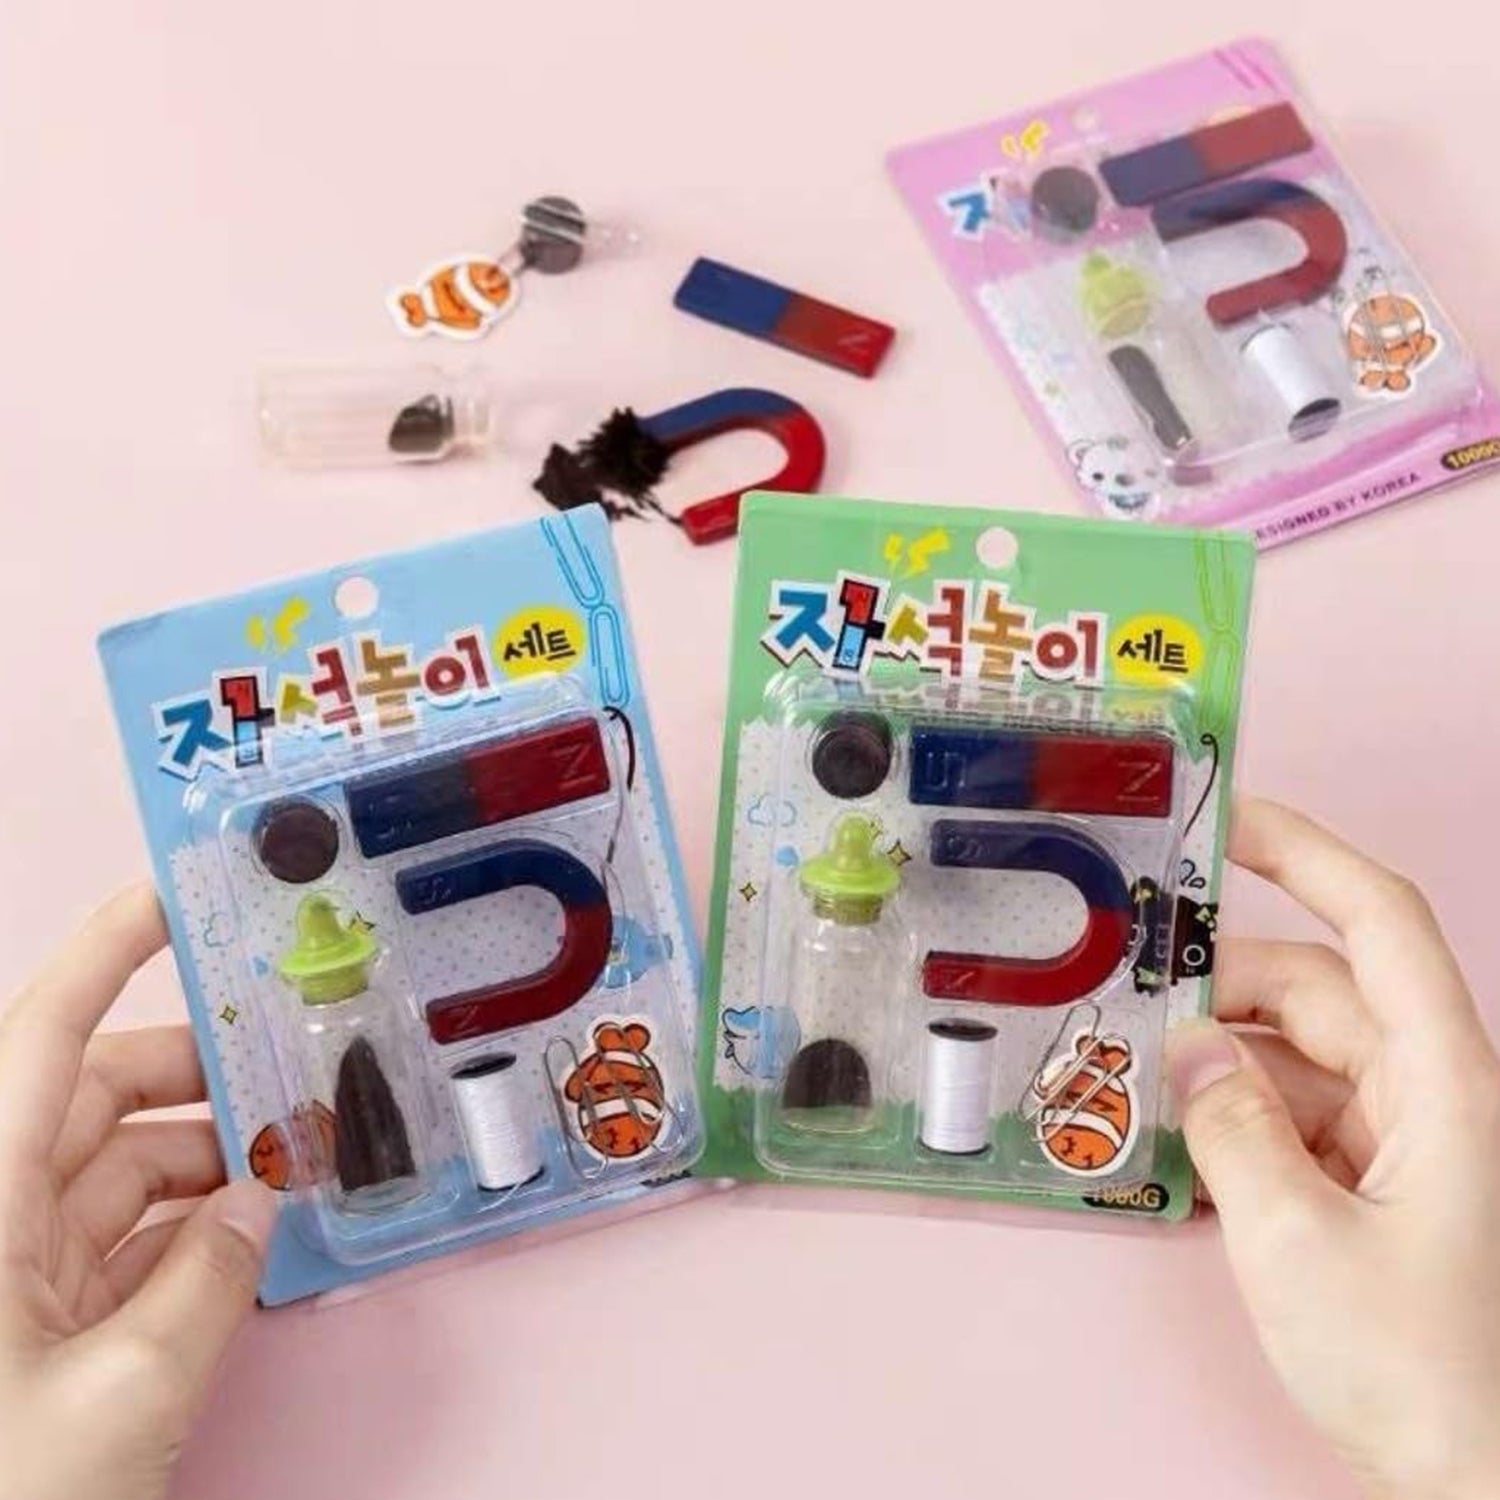 8880 Teaching Aids Magnetic Science Kit Funny Kids DIY Science Kits Educational Experiment Games